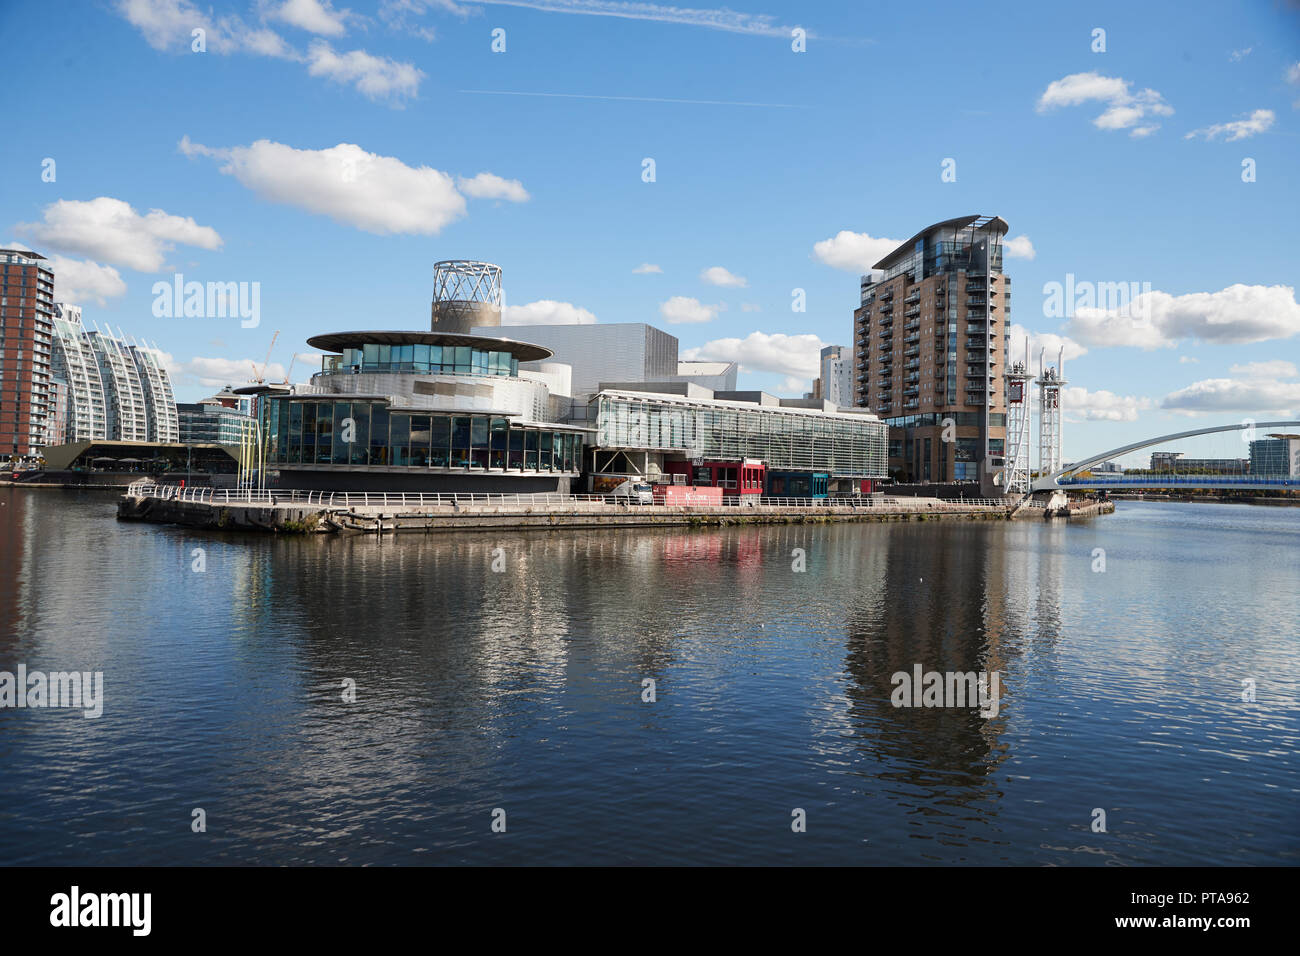 The Lowry Theatre, Salford Quays, Manchester, England Stock Photo